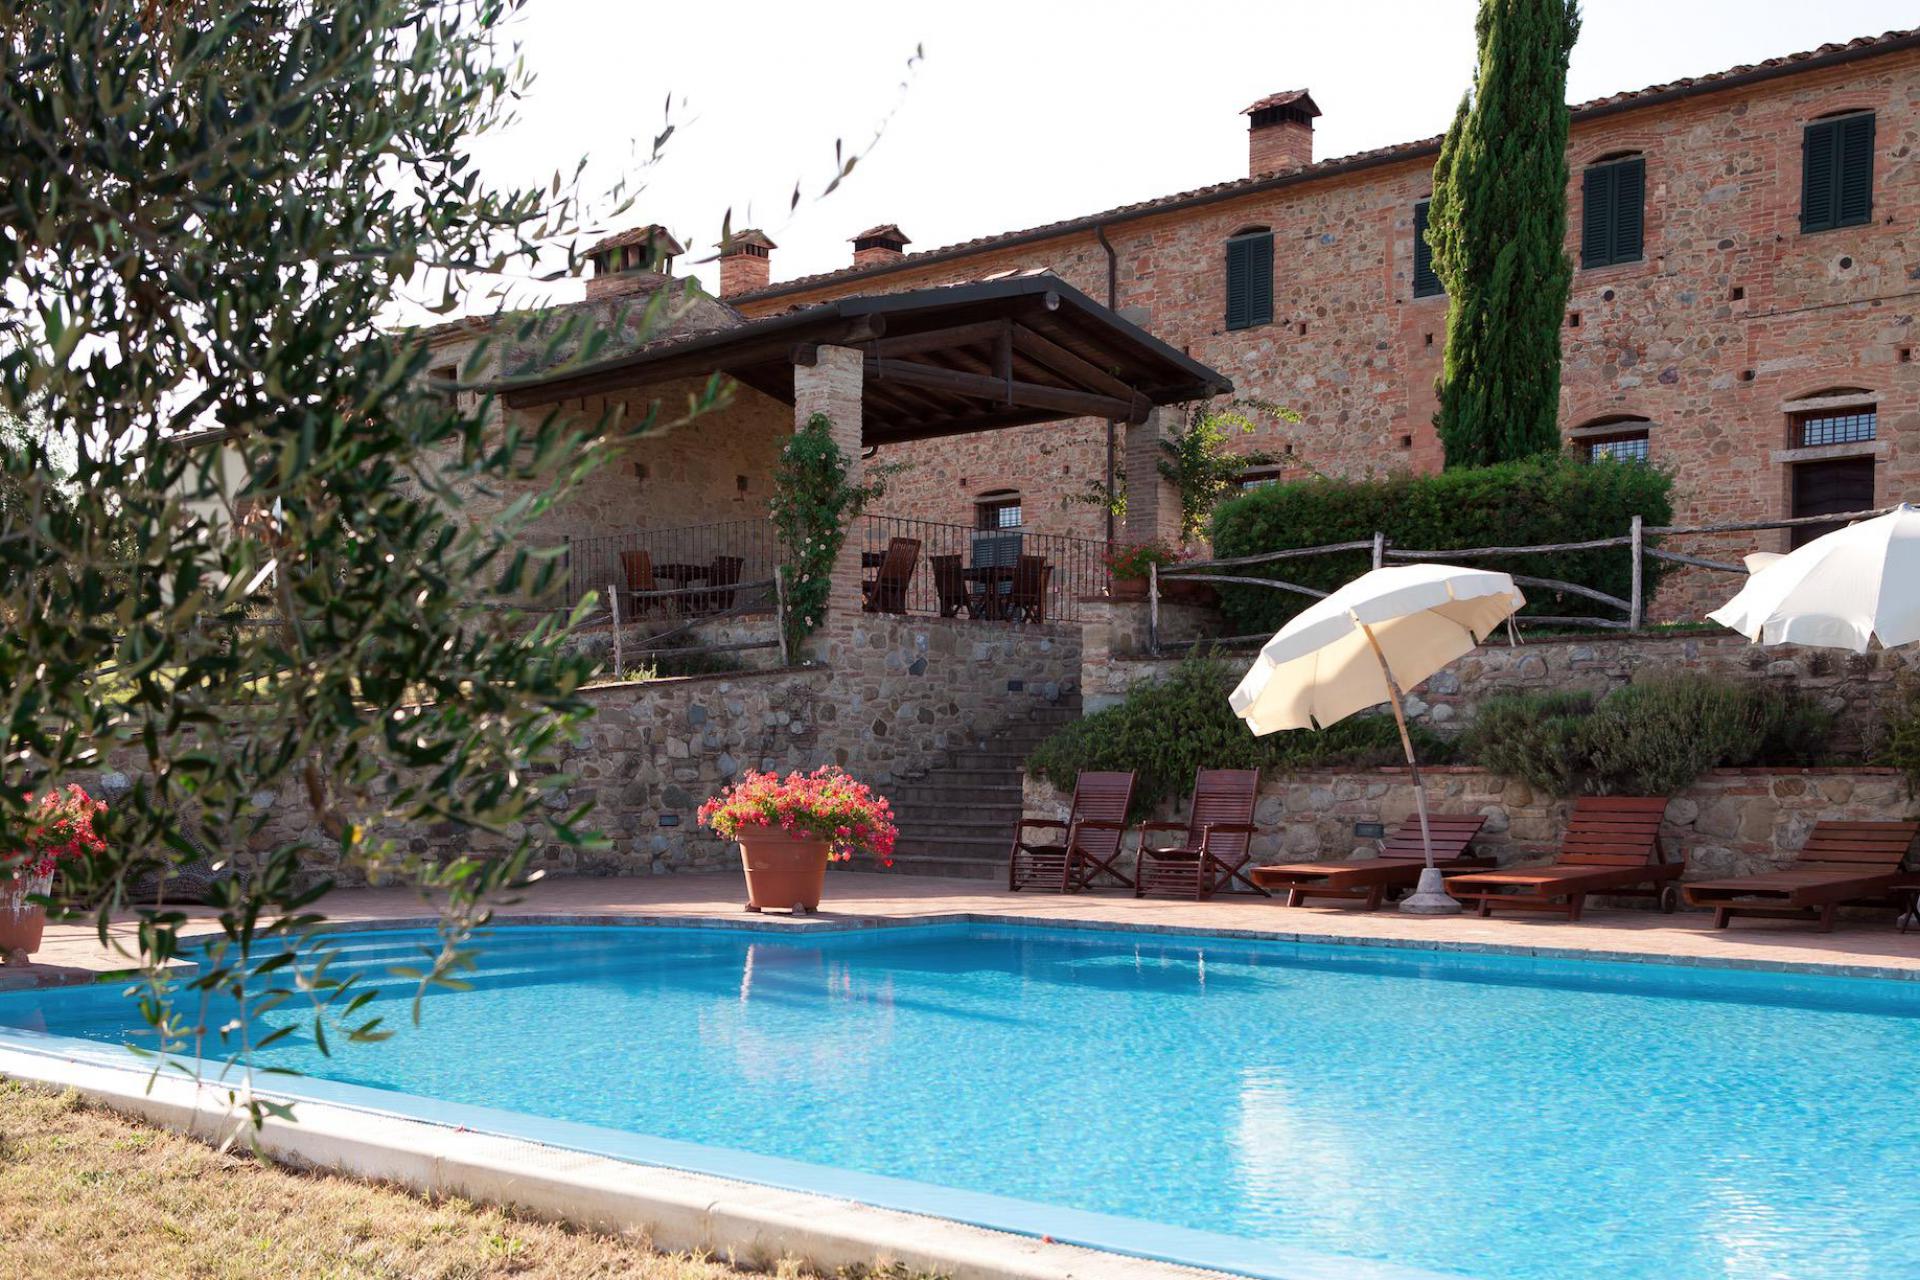 3. Family-friendly agriturismo with pizza night